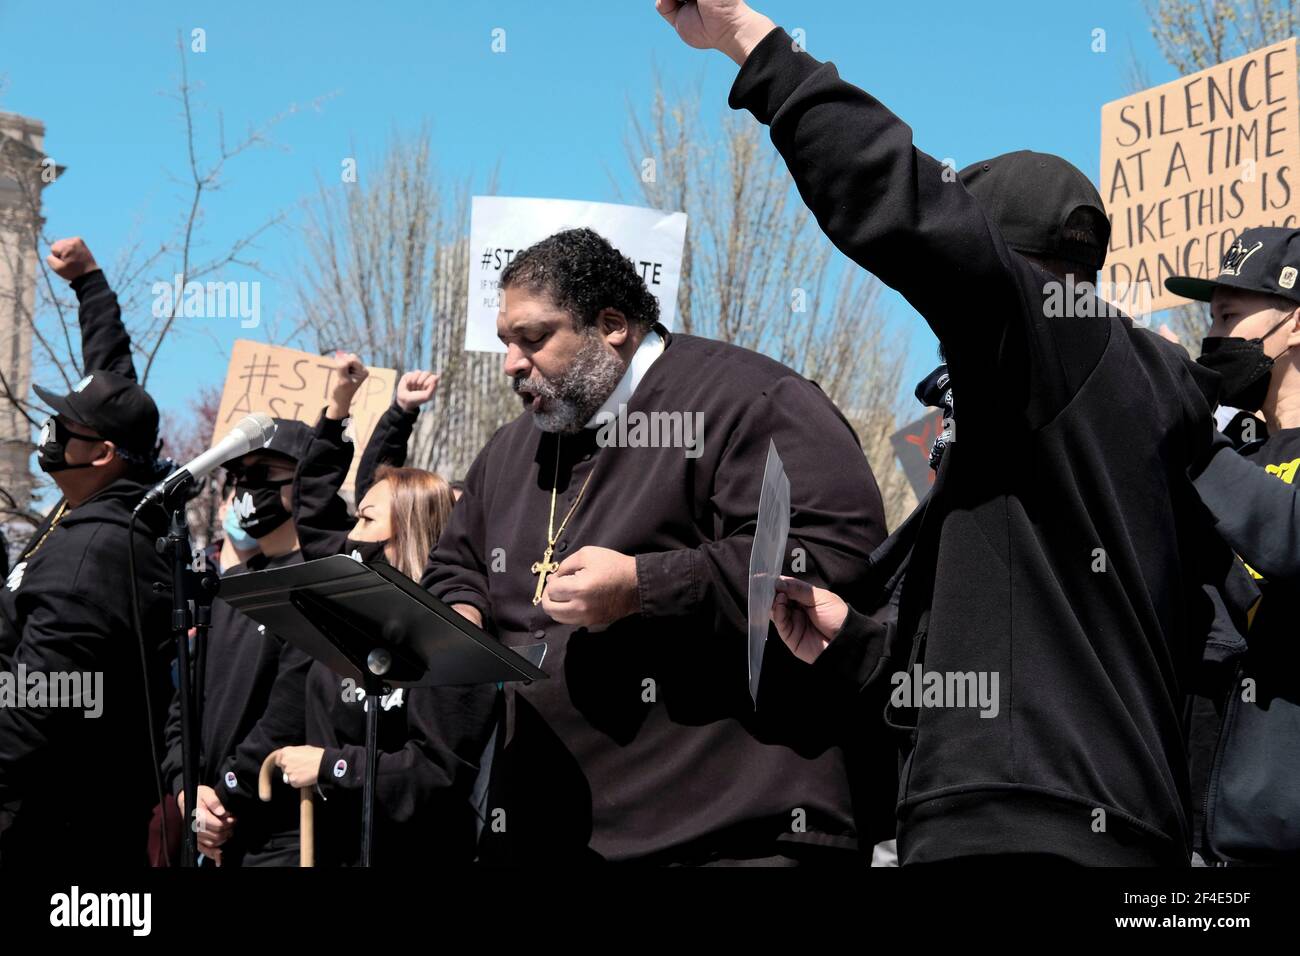 Atlanta, Georgia, USA. 20th Mar, 2021. Co-Chair of the Poor People's Campaign, Reverend William Barber II speaks to a crowd of demonstrators at a Stop Asian Hate March and Rally in Atlanta. The demonstration was held just days after the deadly shootings at three Asian operated spas in Georgia that left eight people dead, six of which were of Asian descent. The shooter, a white man named Robert Aaron Long, has been arrested and charged with eight counts of murder. Credit: John Arthur Brown/ZUMA Wire/Alamy Live News Stock Photo